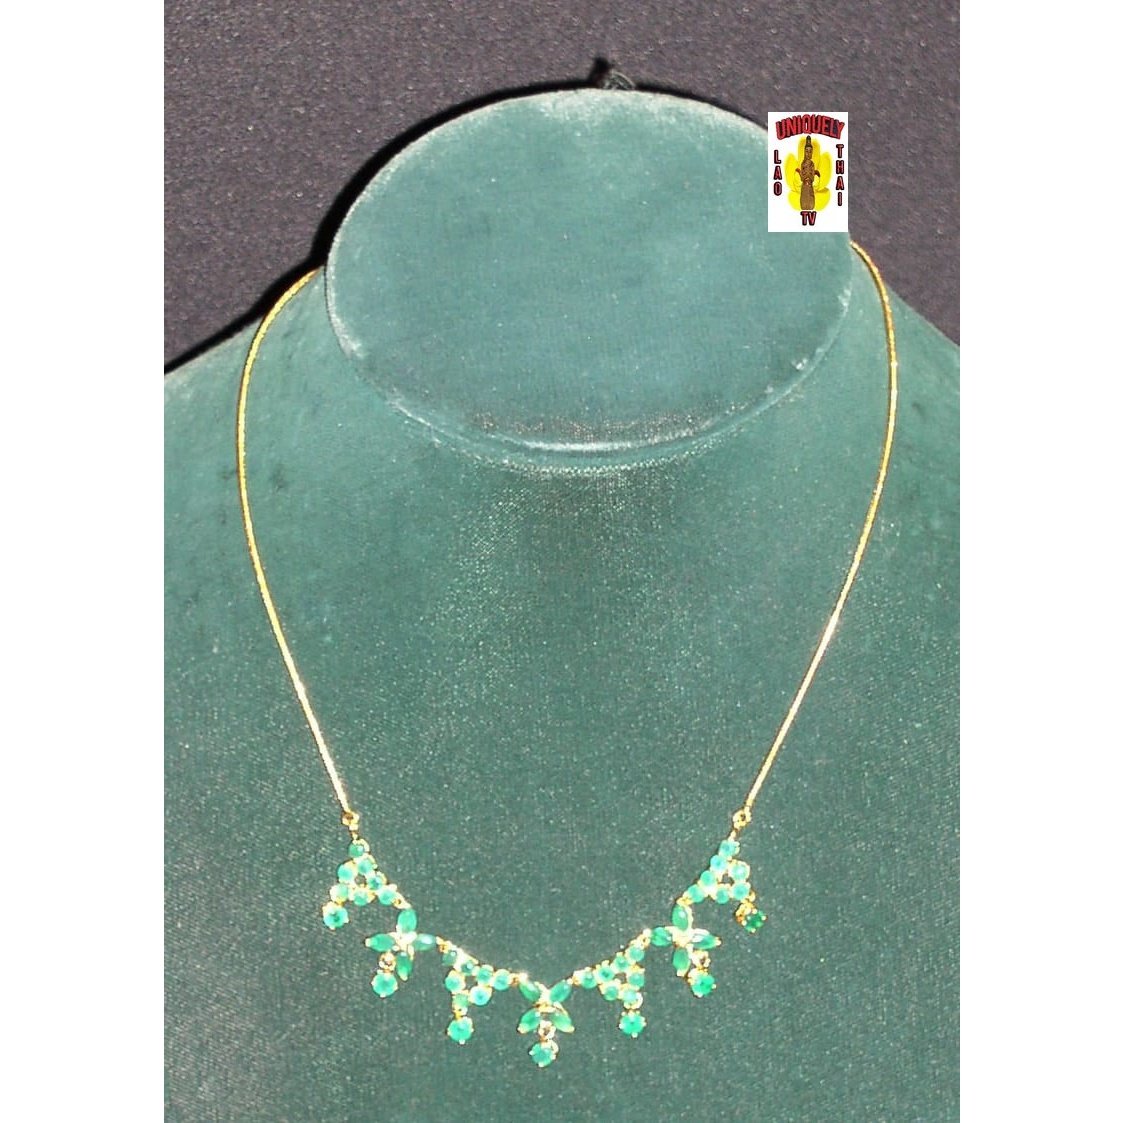 Necklace of Seven Green Flowers